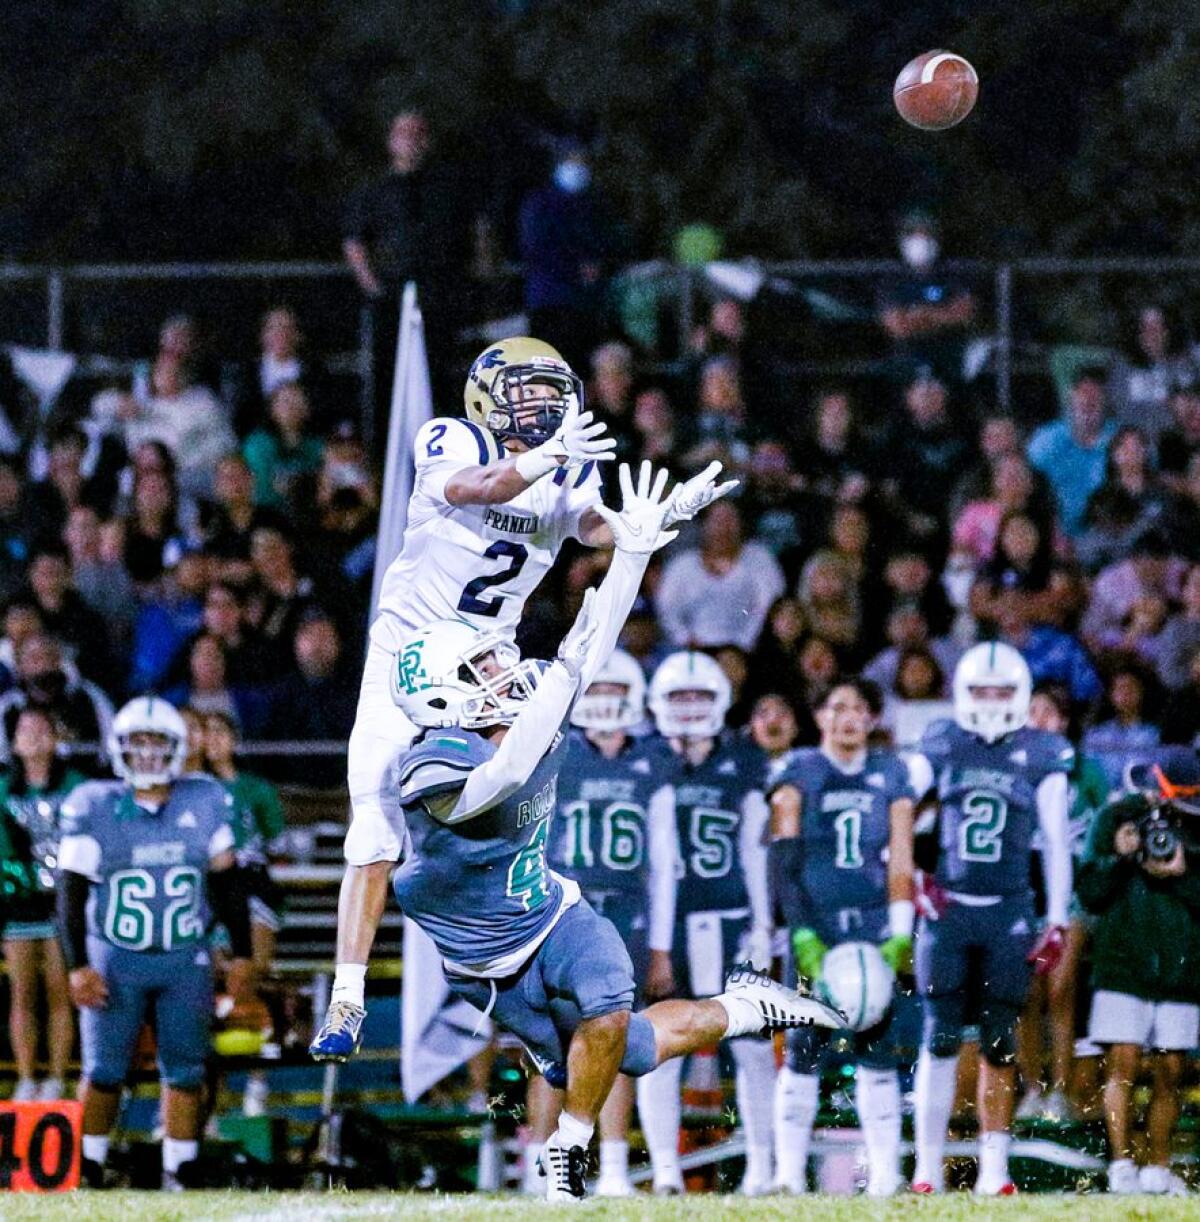 Hector Ceballos of Franklin leaps over Anthony Leon-Vidales of Eagle Rock to make 42-yard catch.